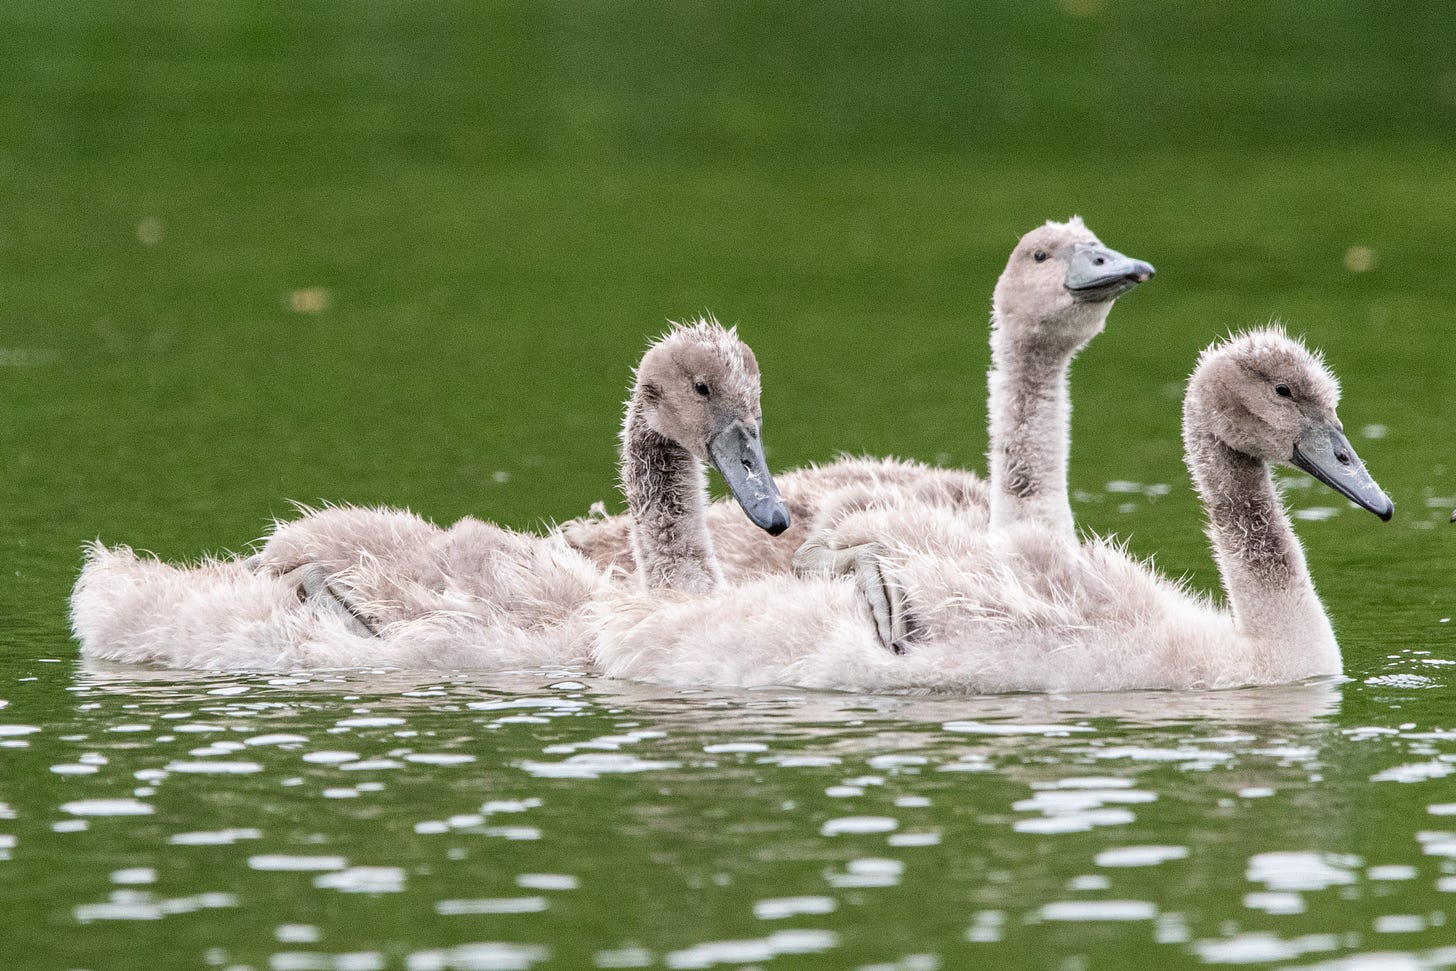 Three gray, fuzzy mute swan cygnets, swimming in file, heads at different heights